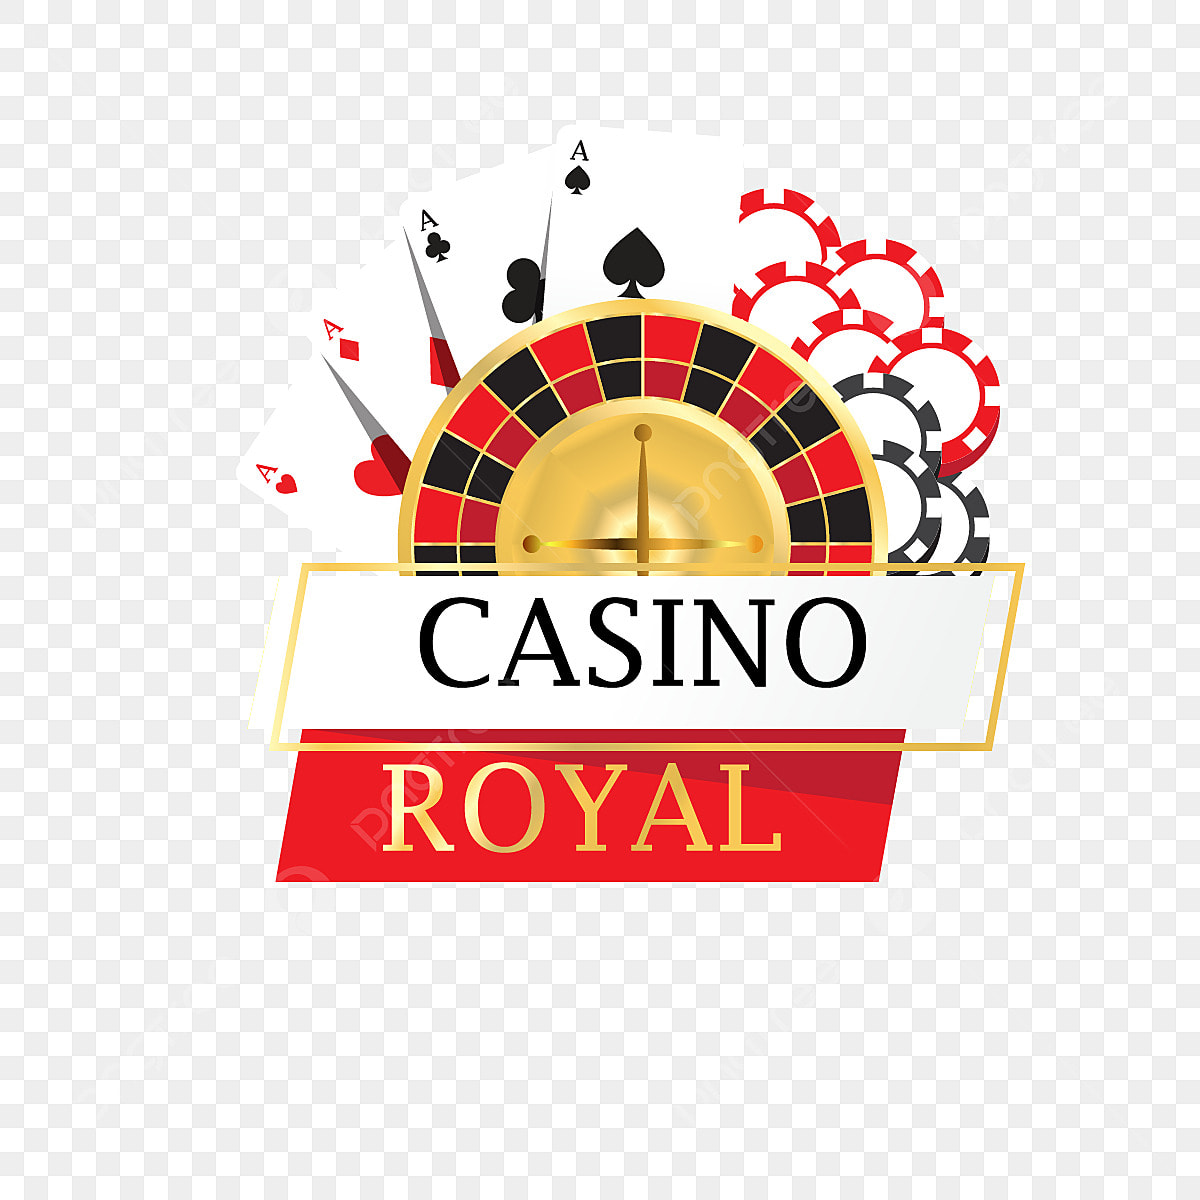 casino royale download